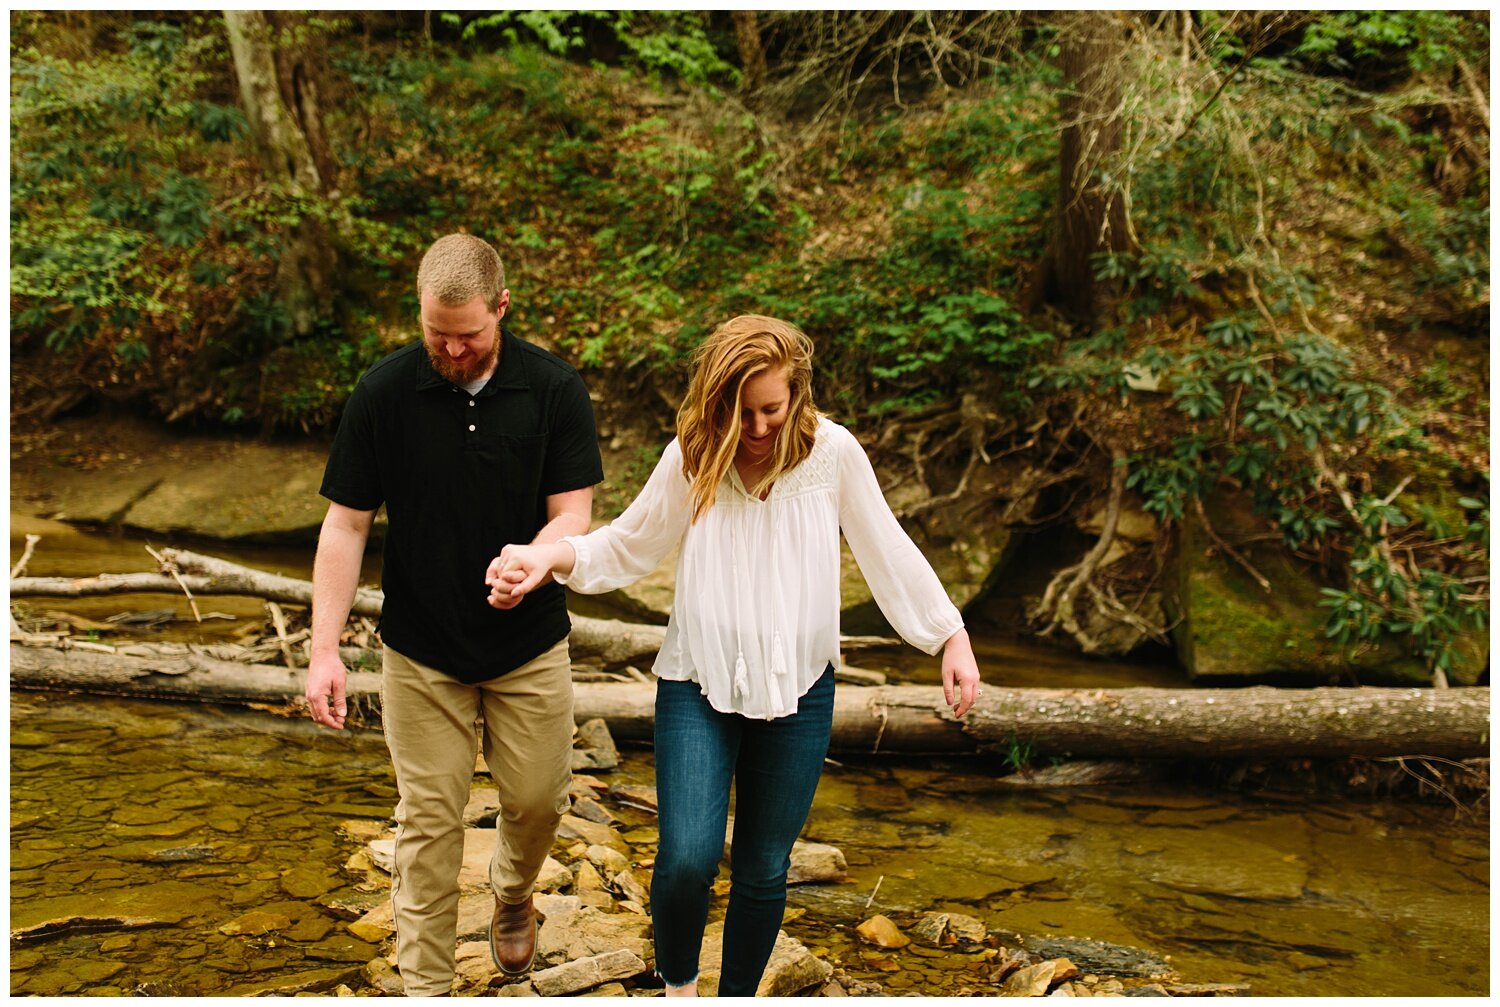 Kendra_Farris_Photography_Red_River_Gorge_Engagement_Photos-41.jpg